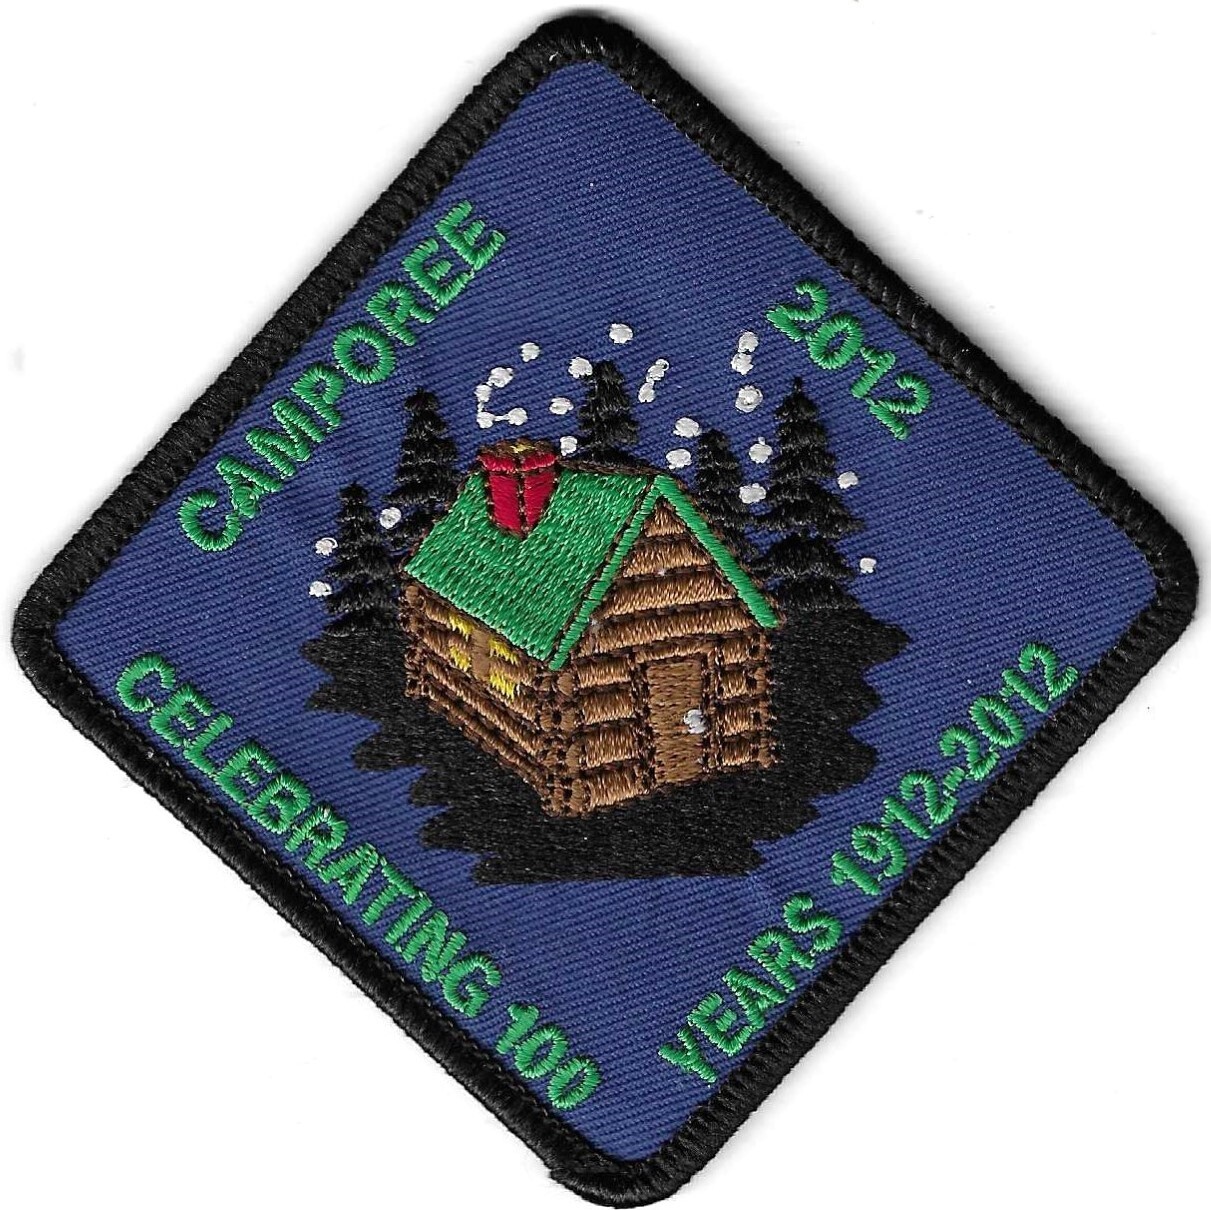 100th Anniversary Patch Camporee council unknown